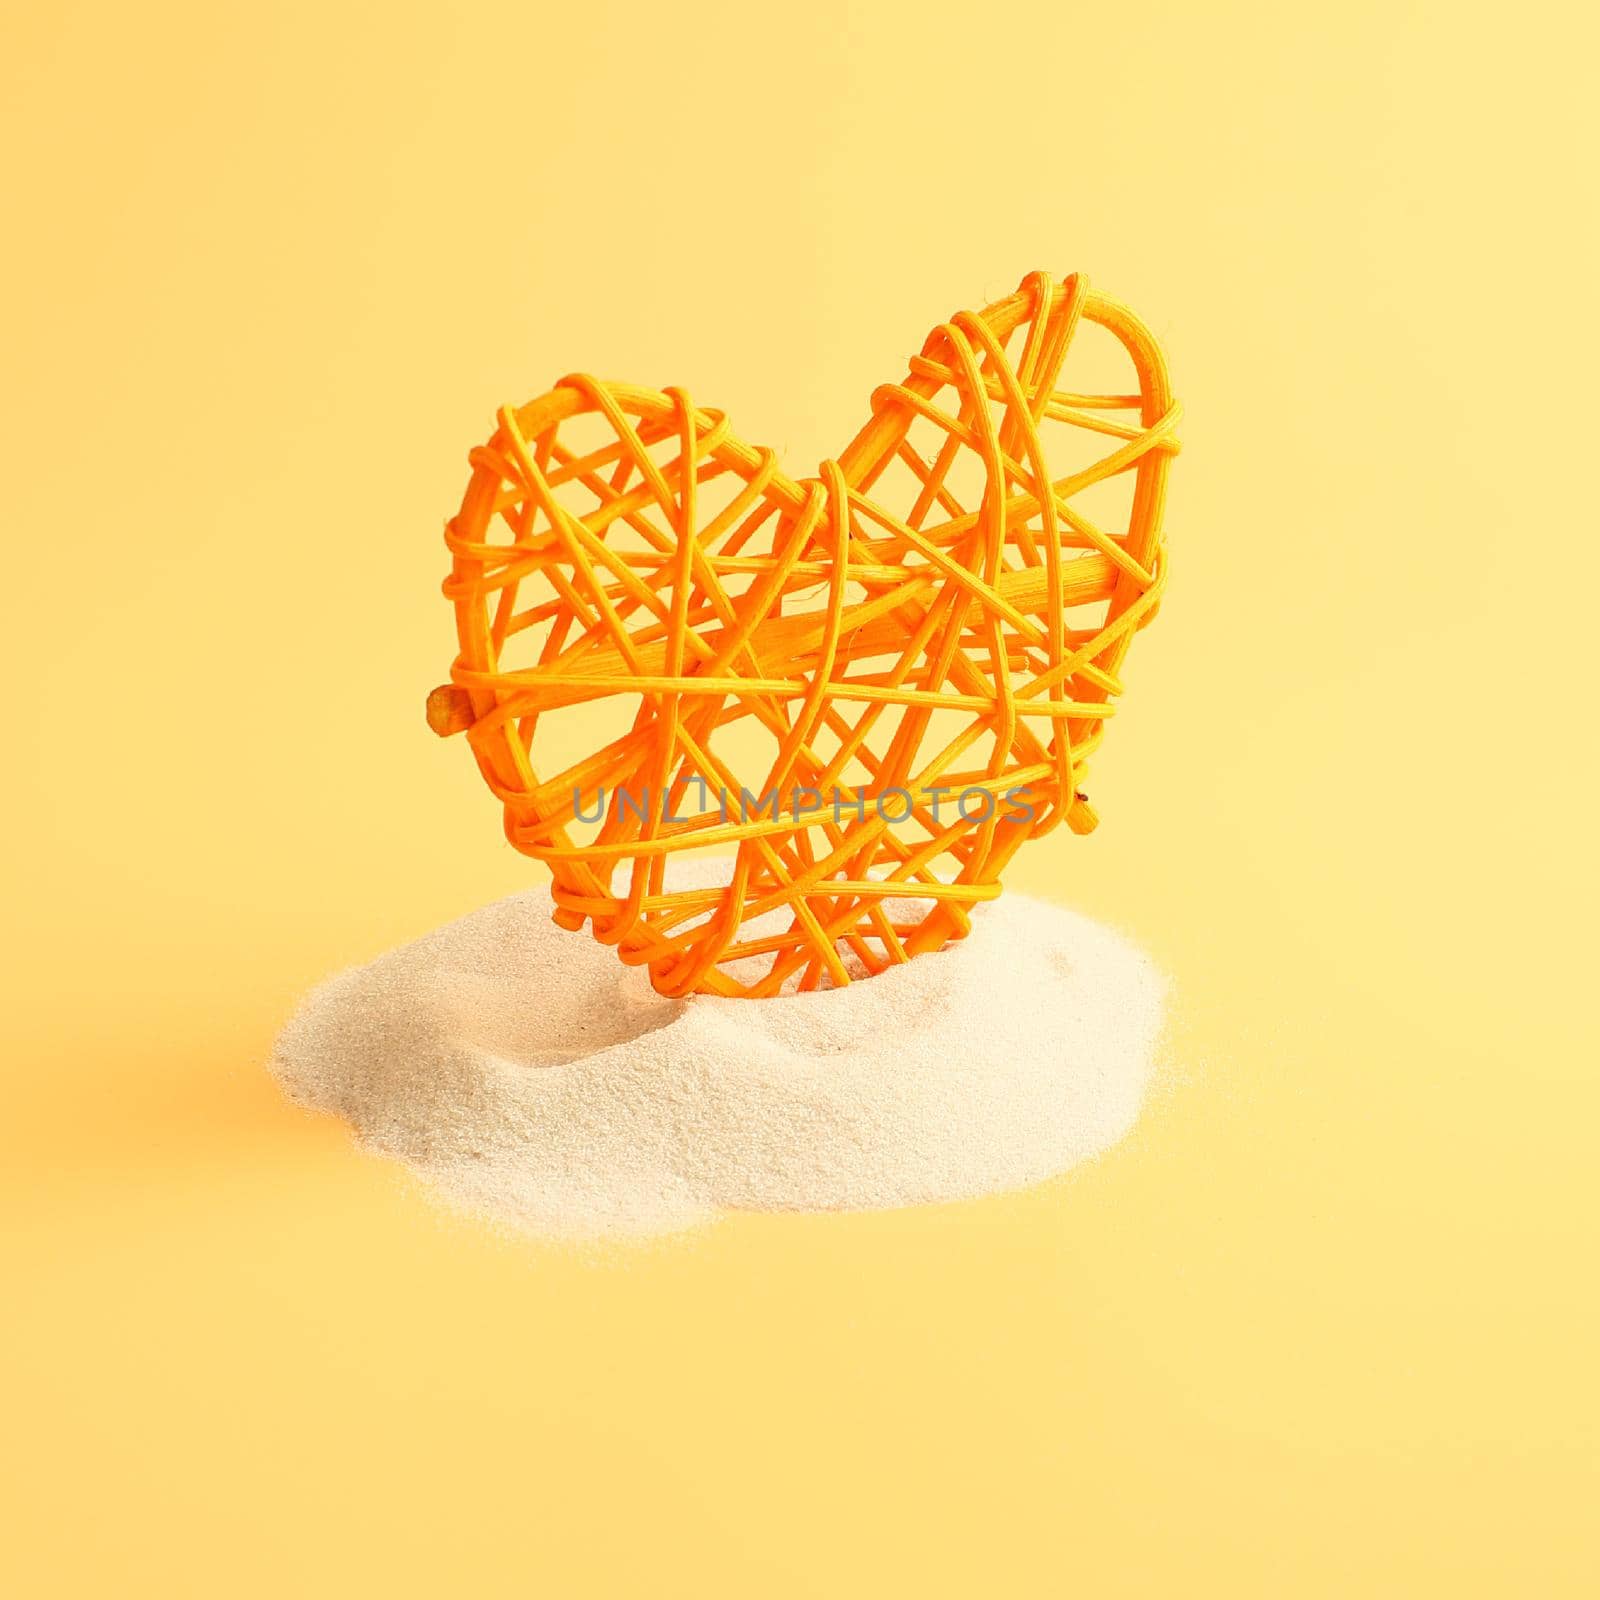 Heart in sand on yellow background, concept with shadow by Maximusnd